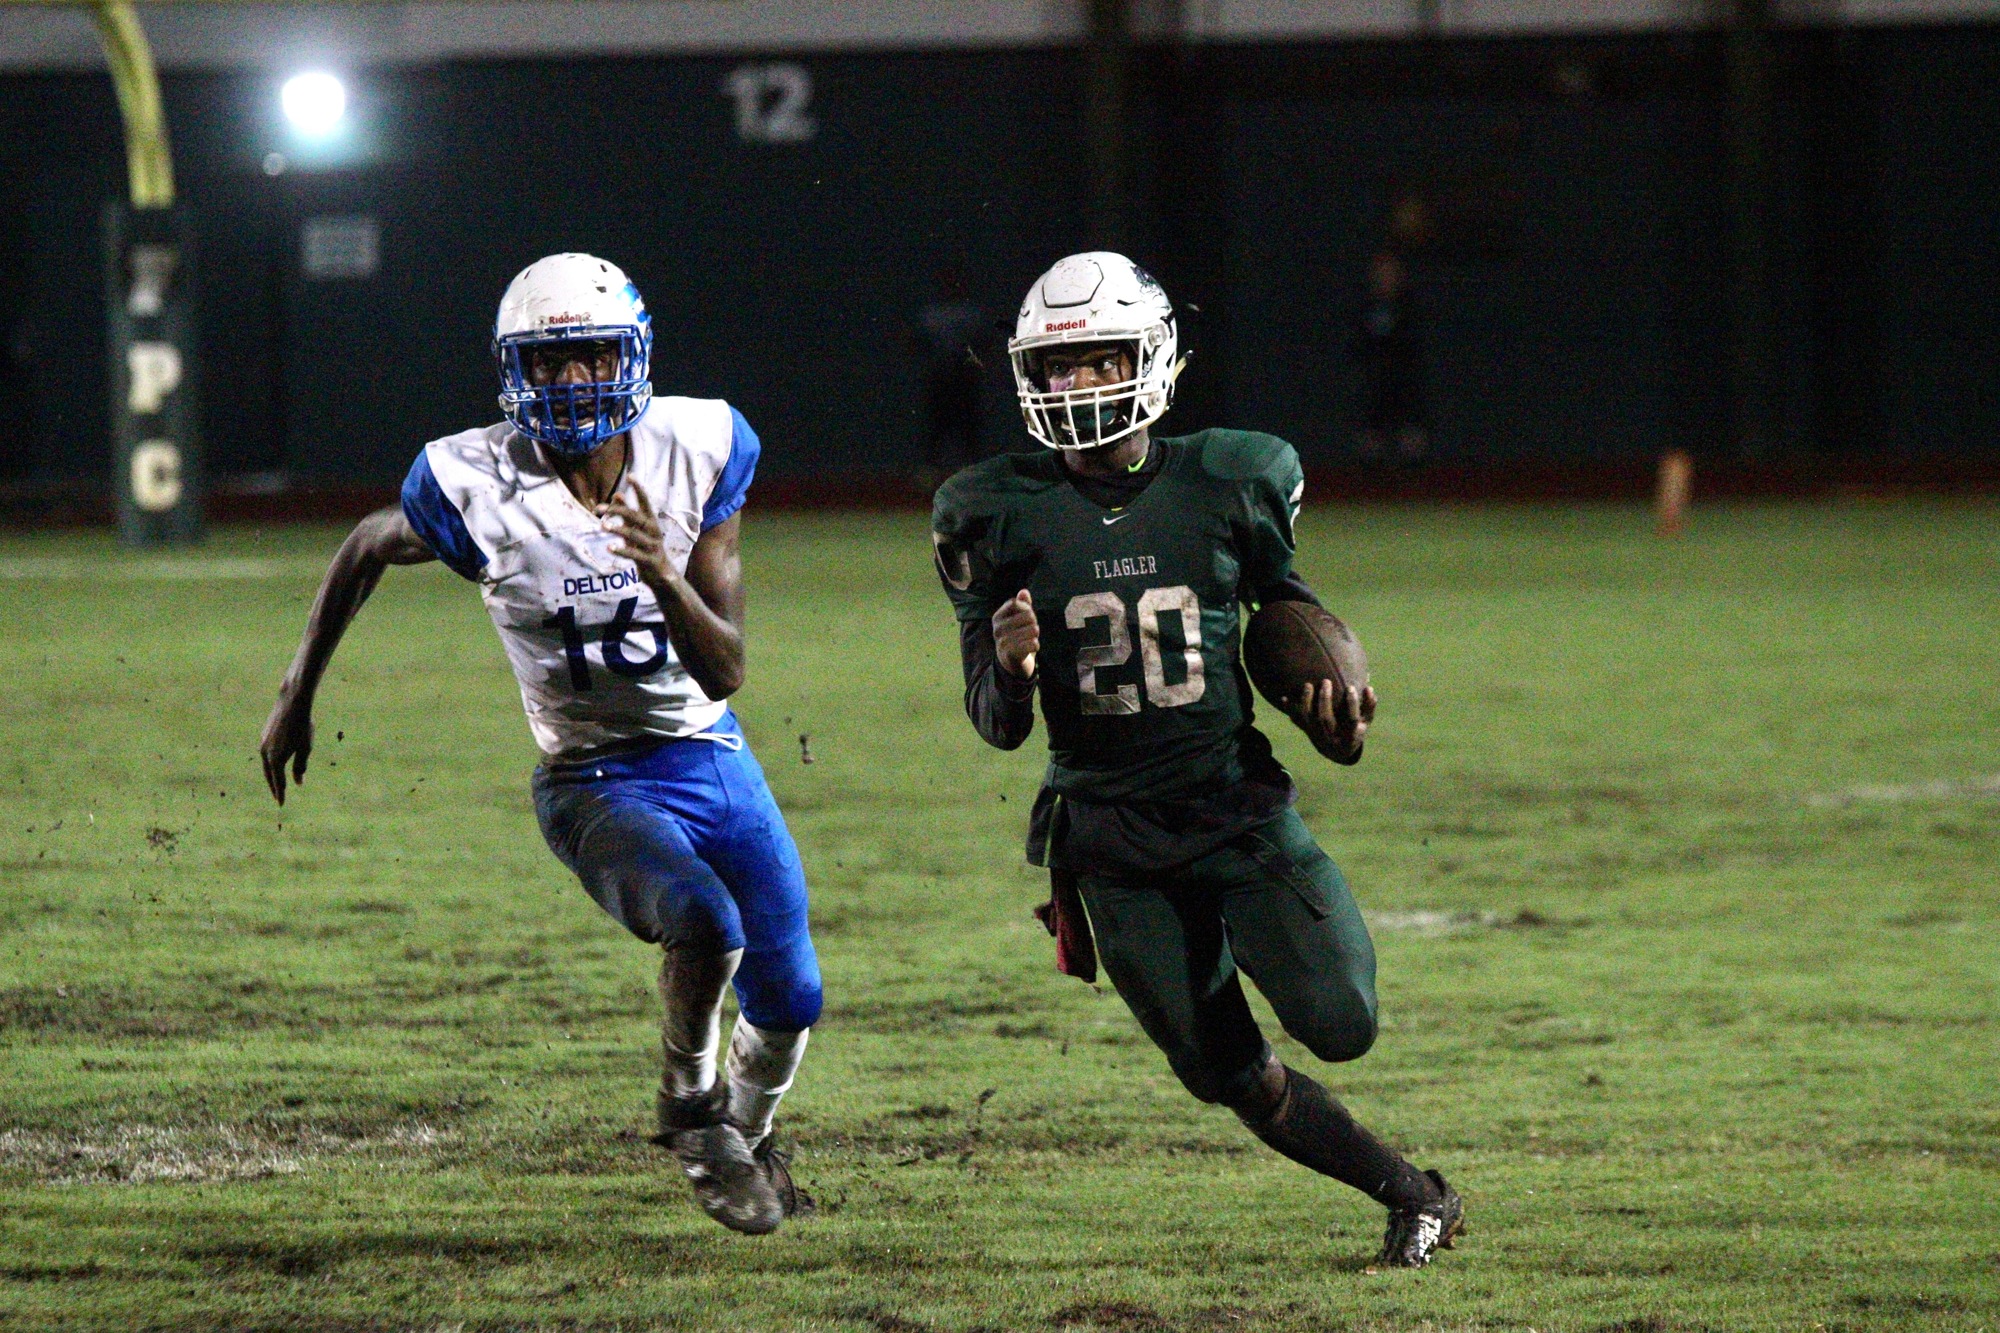 FPC defensive back Damien Irven returns a punt. Irven's pick six in the fourth quarter gave the Bulldogs their first lead of the game. Photo by Ray Boone